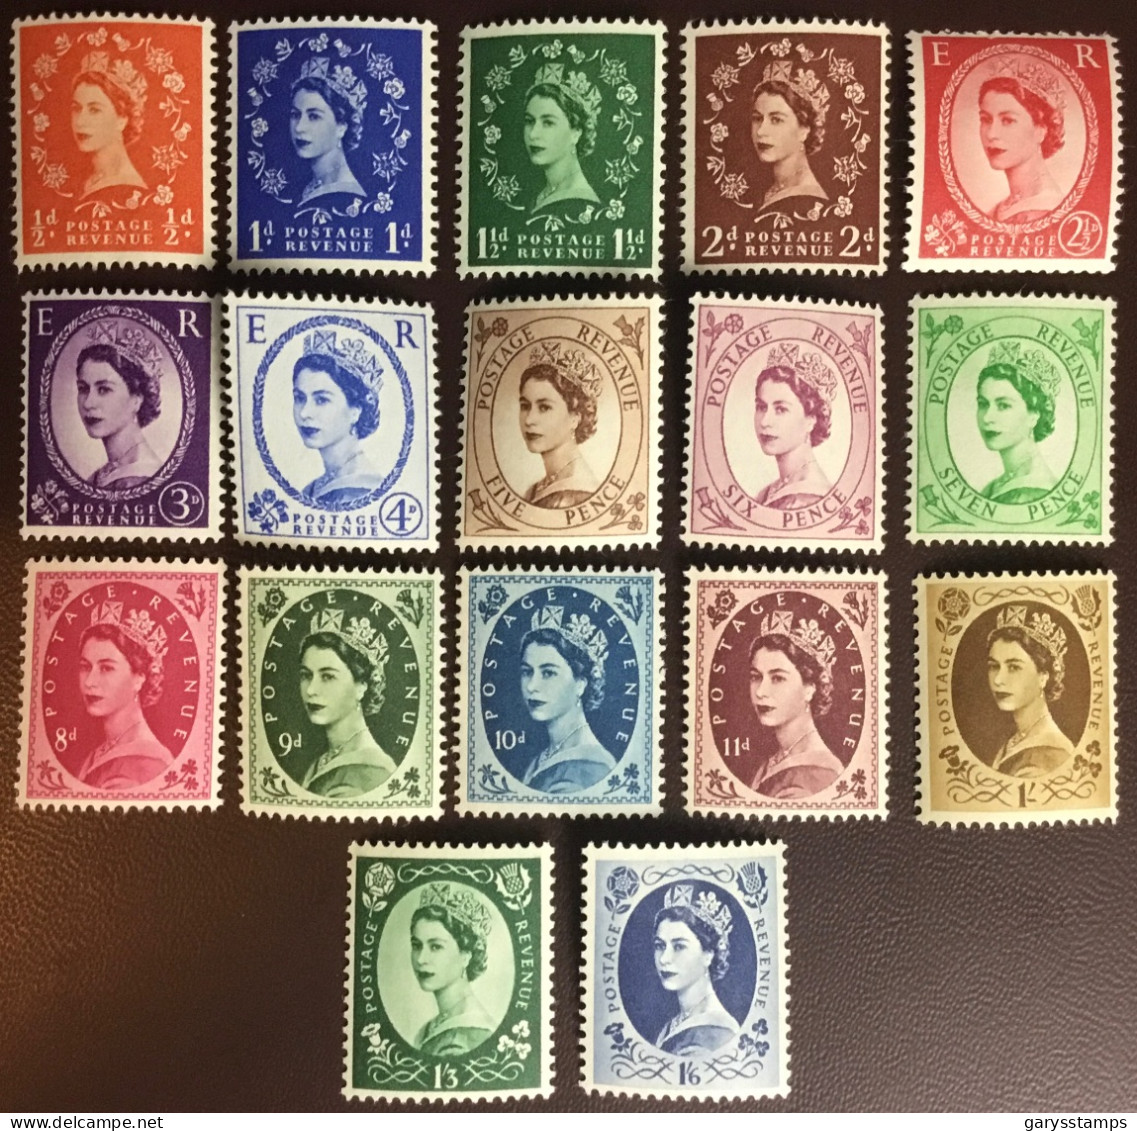 Great Britain 1952 -1954 Definitives Set MNH - Unused Stamps